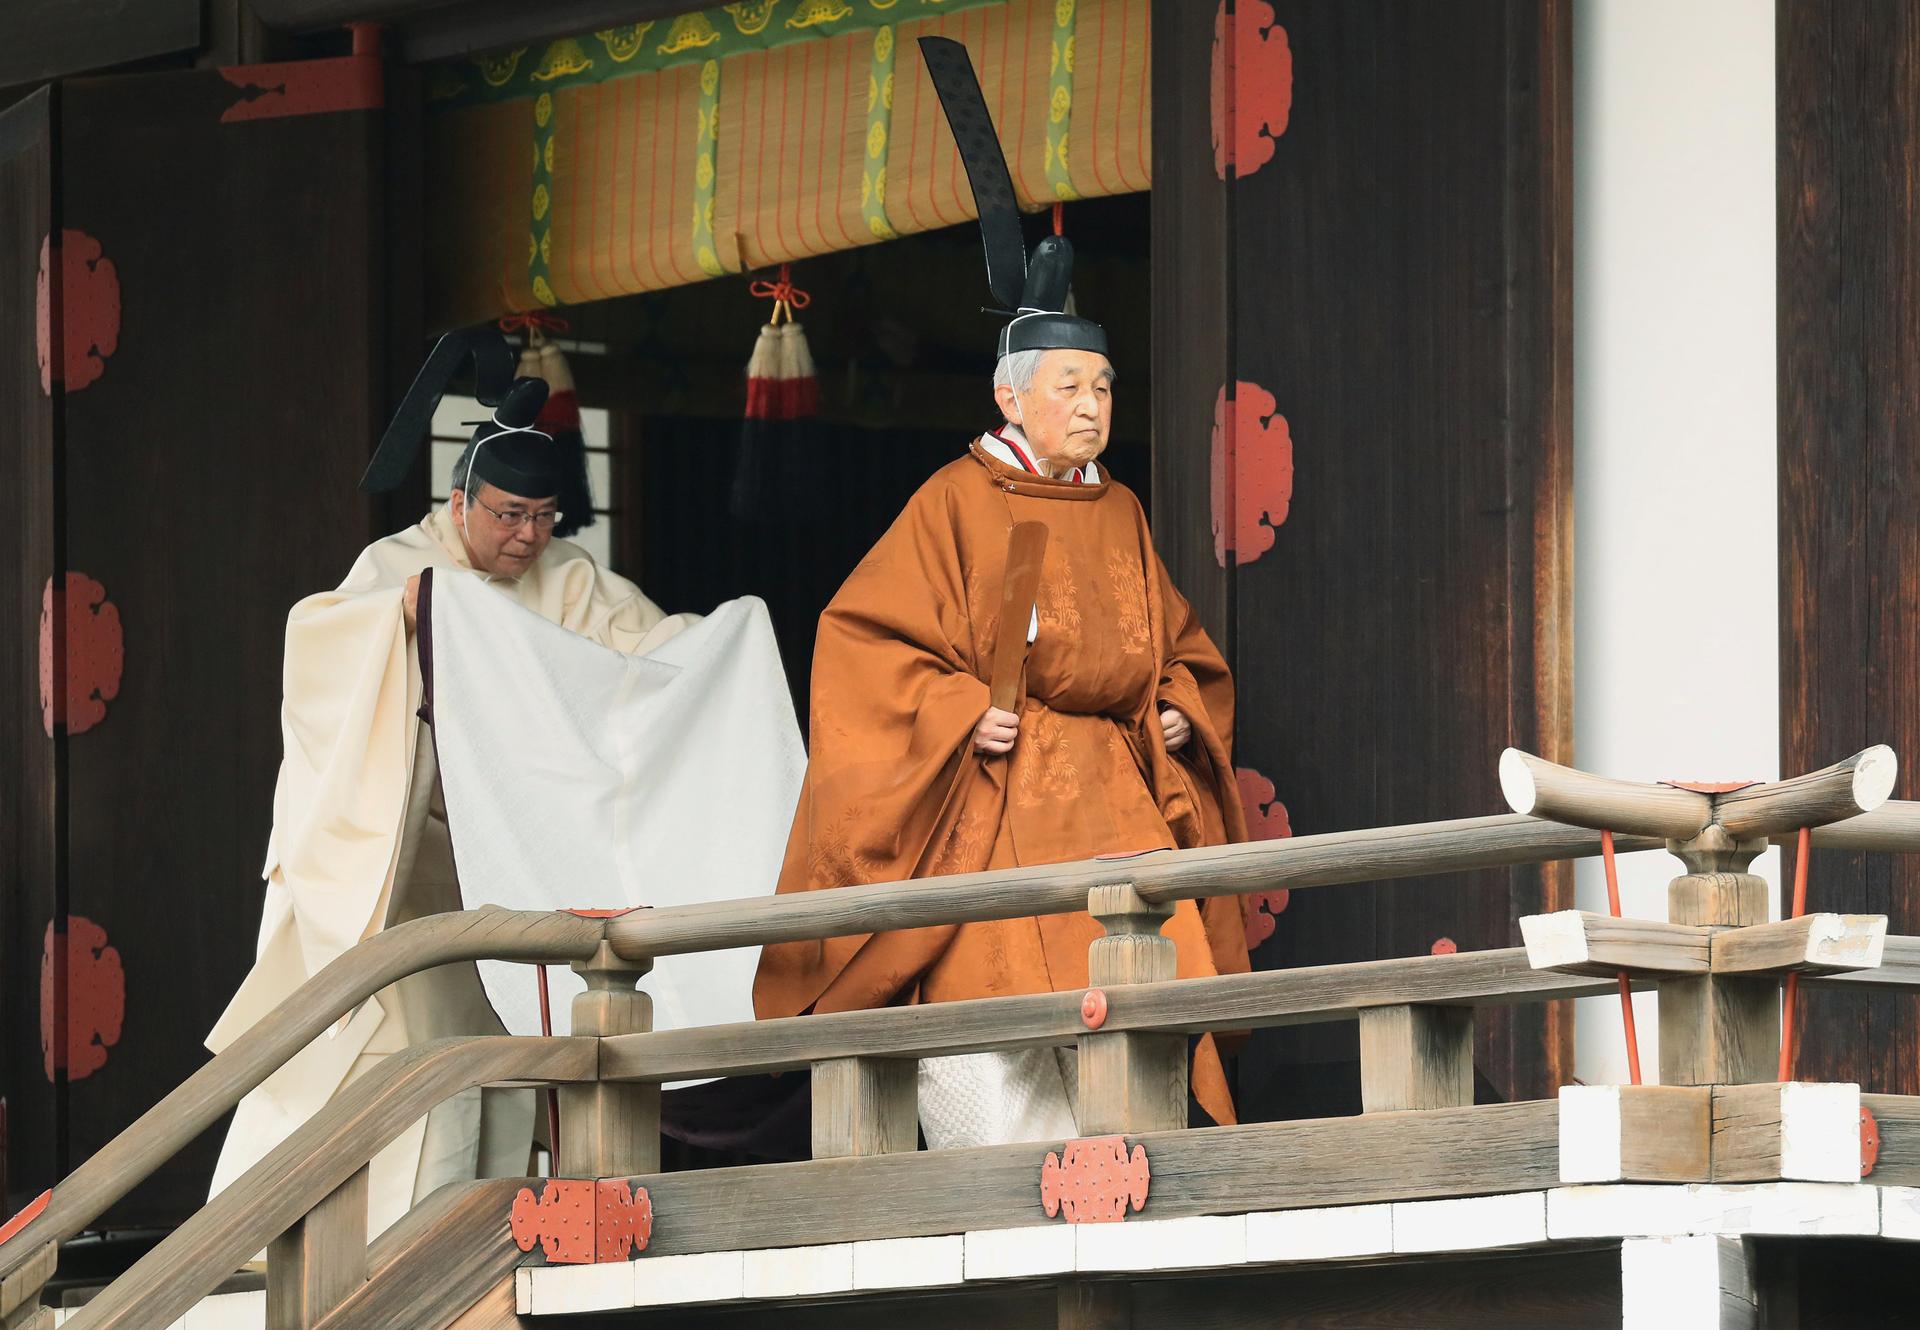 Emperor Akihito prays ahead of Japan's first abdication in two centuries